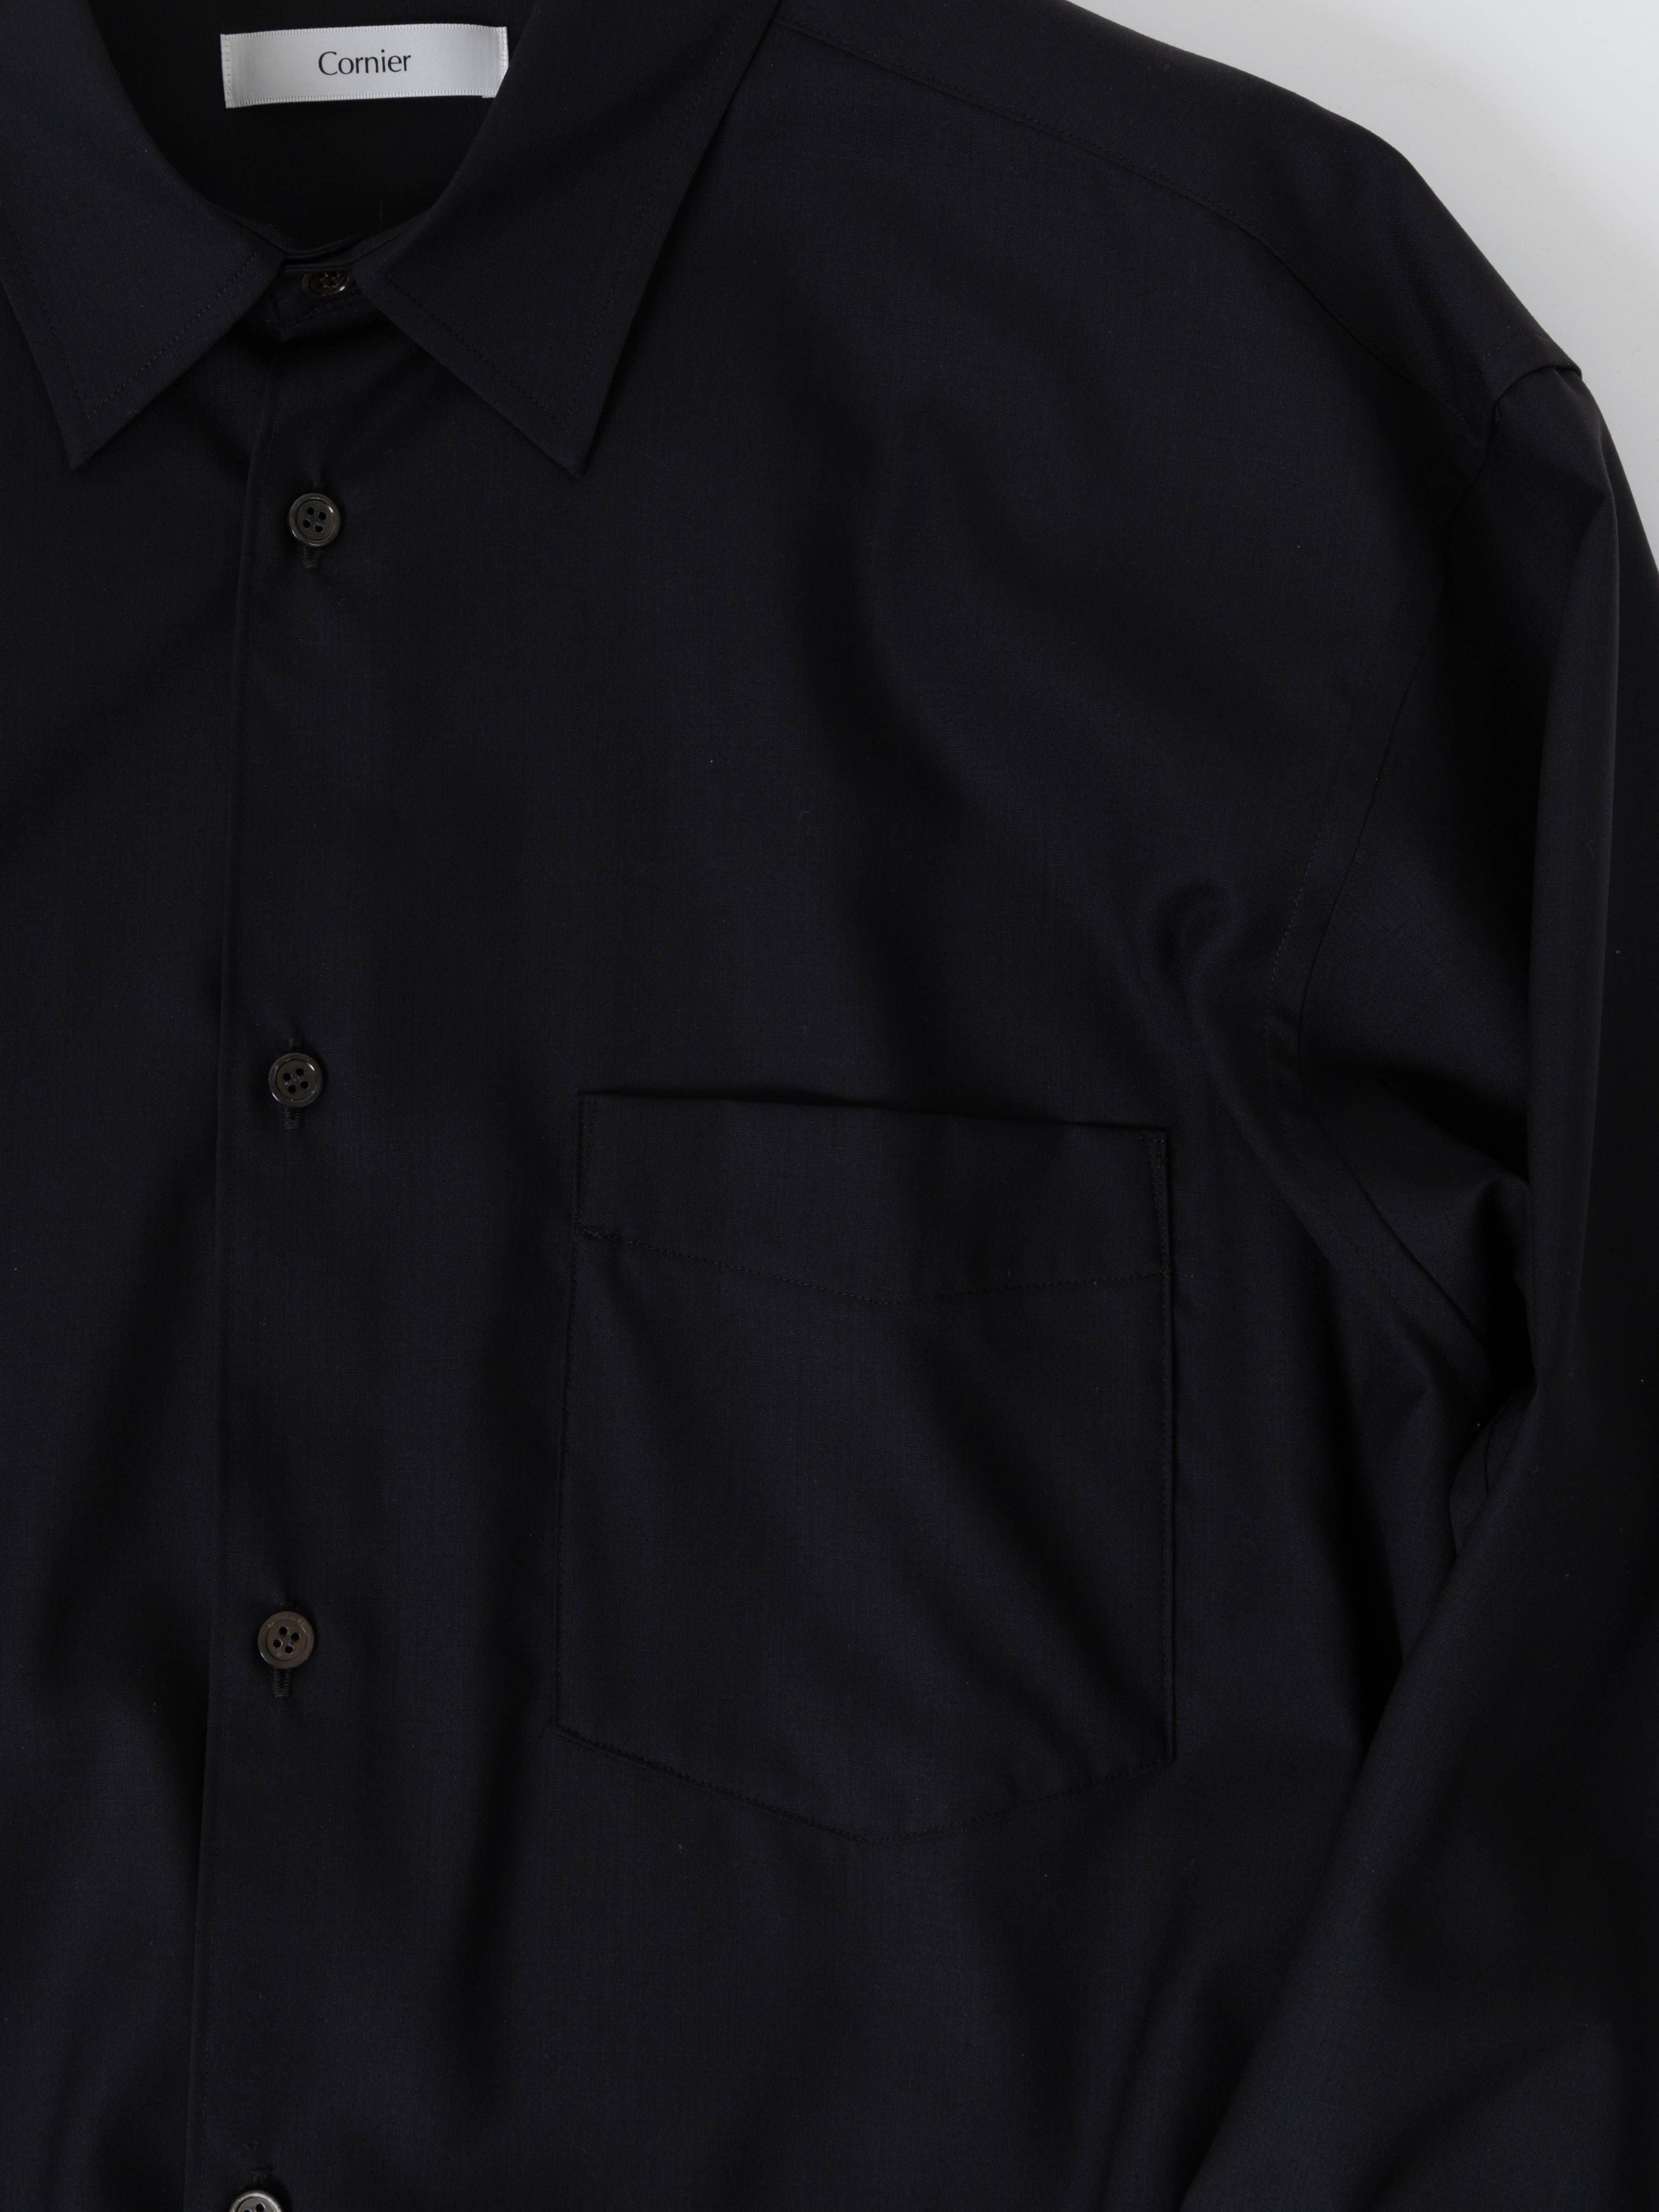 cornier/WORSTED WOOL SHIRTS｜FADED BLACK